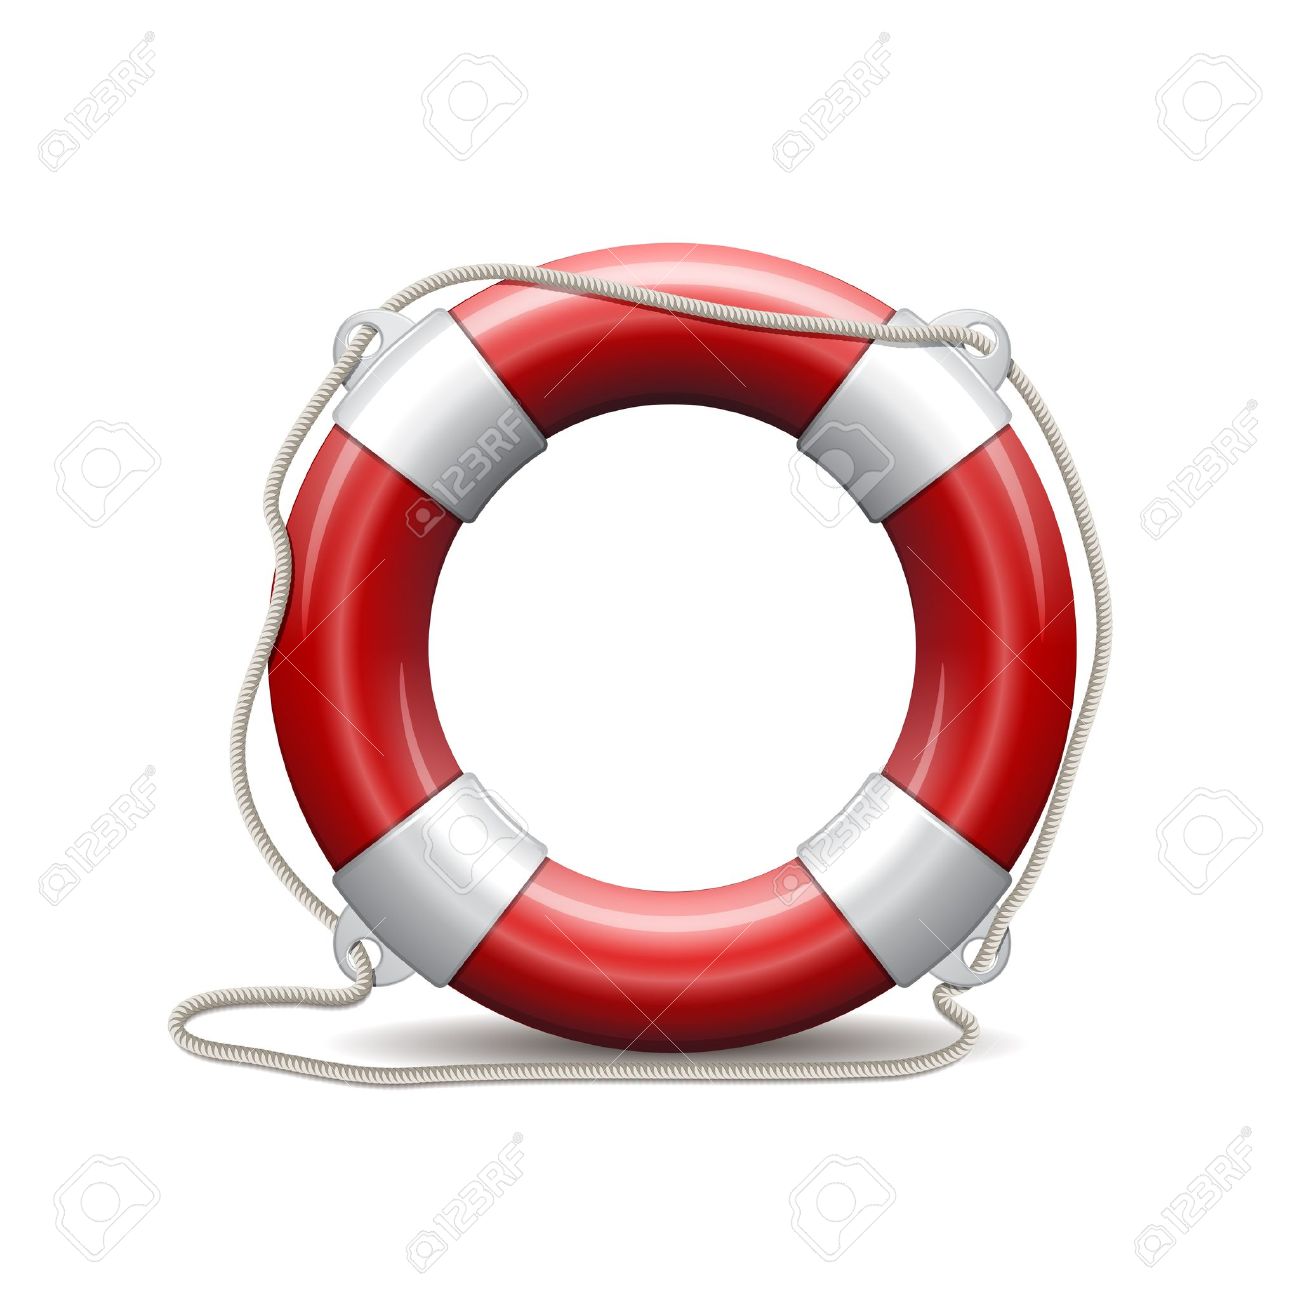 life preserver: Red life buoy on white background